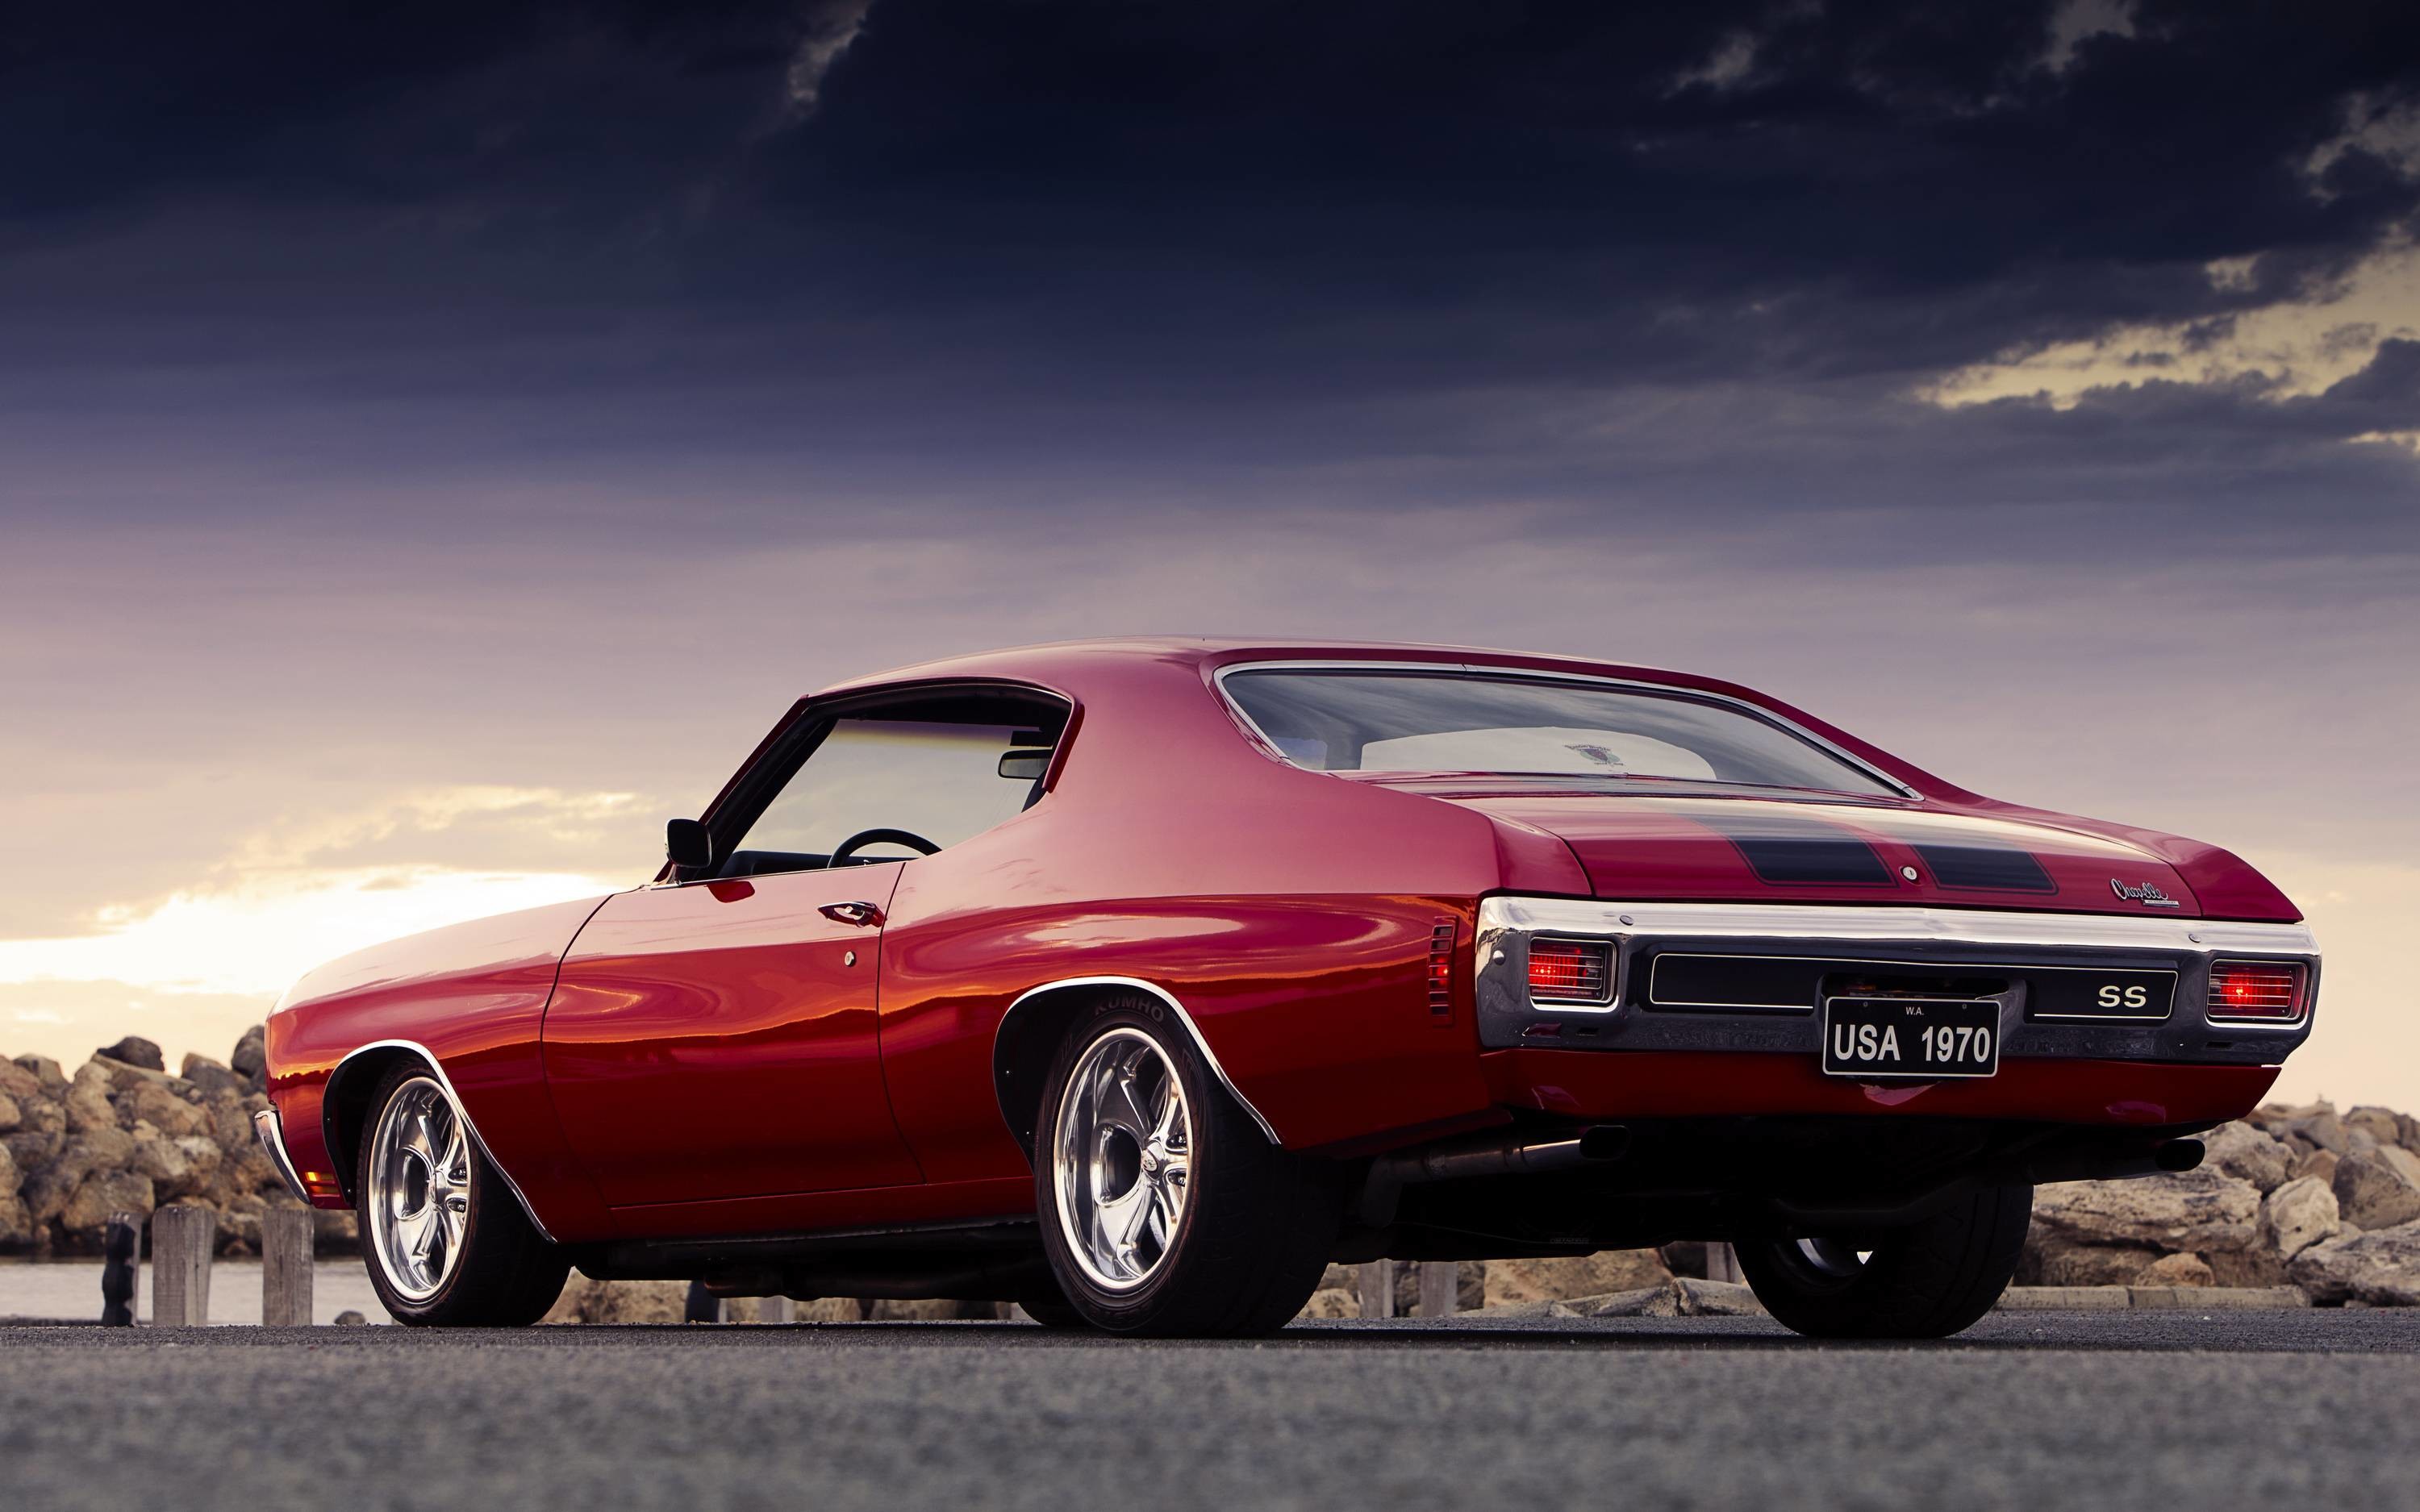 3000x1875 Wallpapers chevrolet chevelle ss, chevrolet, muscle car - car .